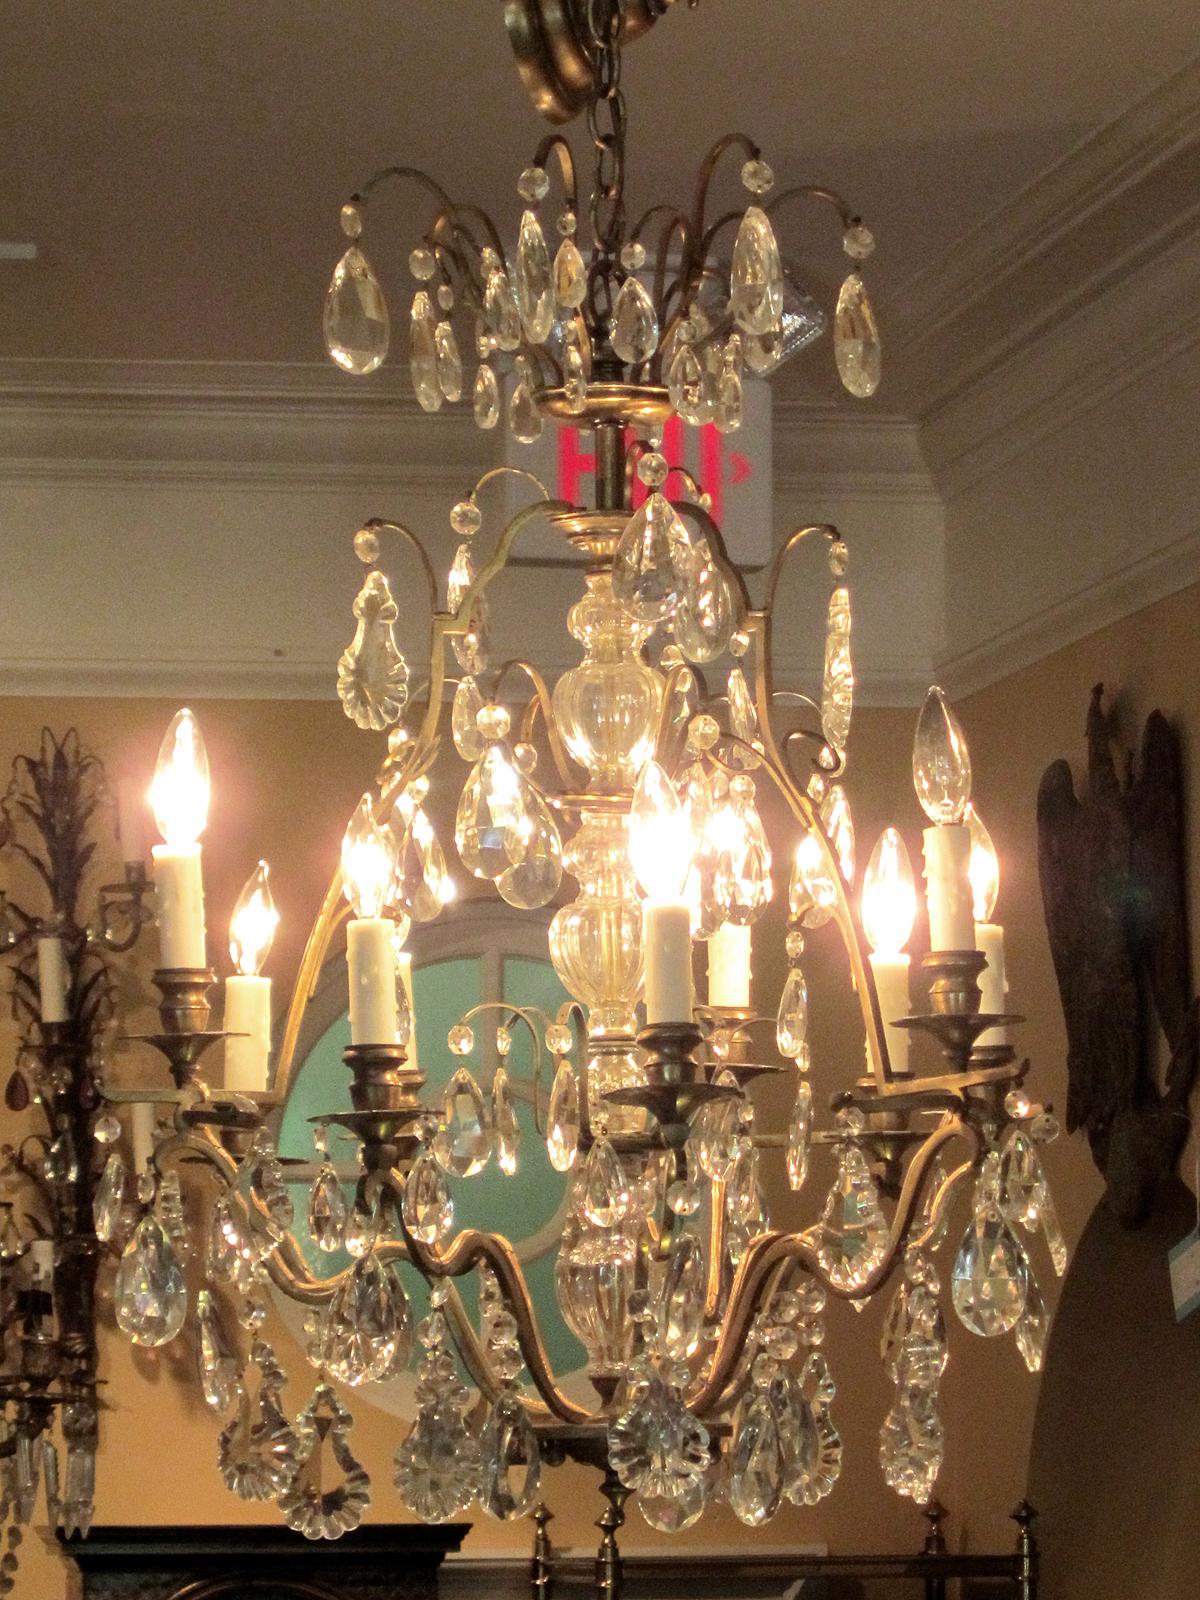 20th century Louis XV style gilt bronze and crystal chandelier
New wiring.